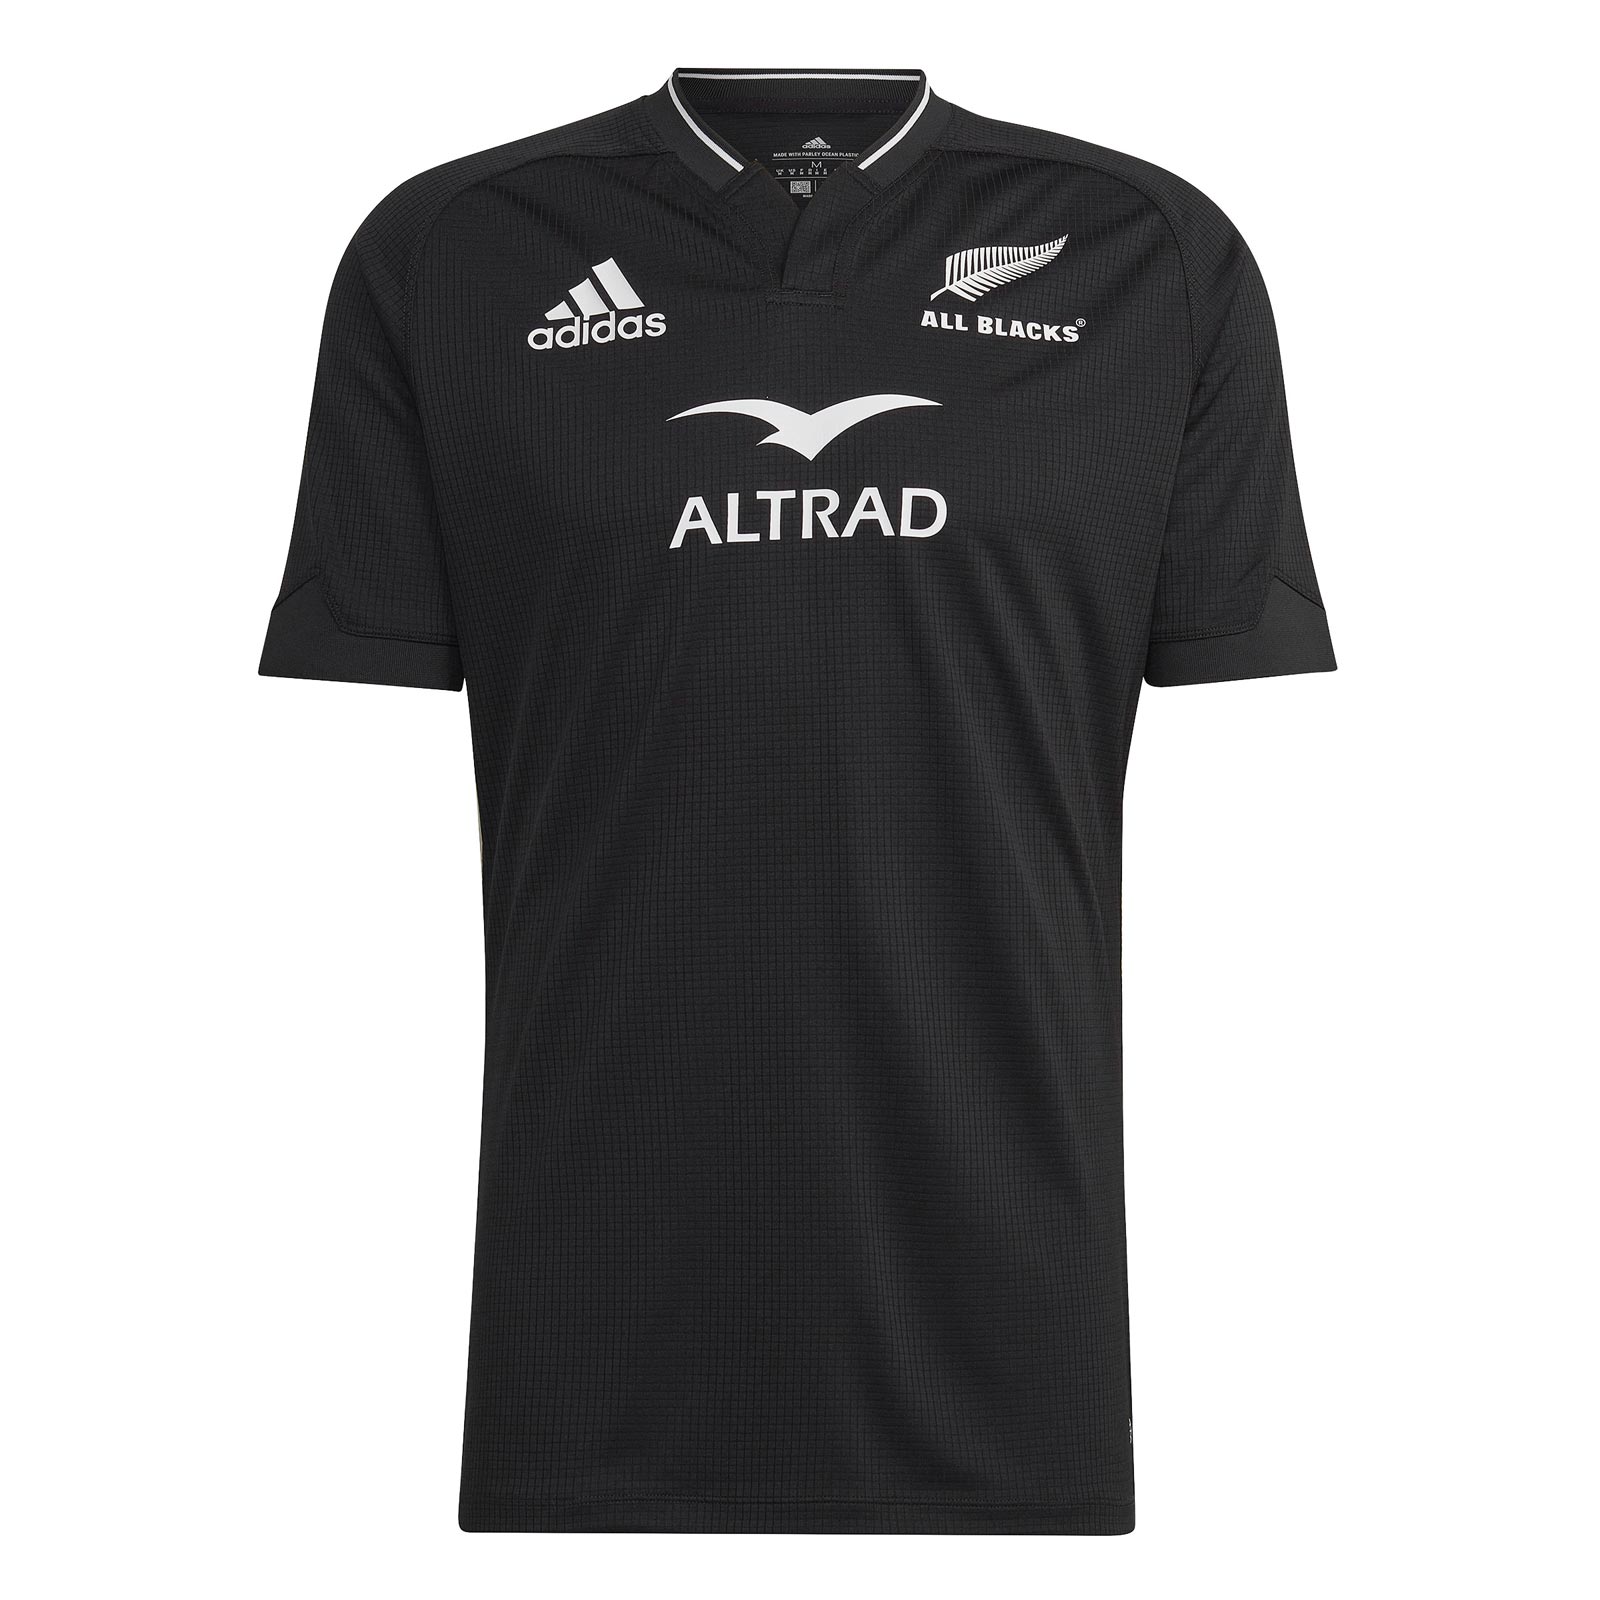 adidas All Blacks Rugby Home Jersey